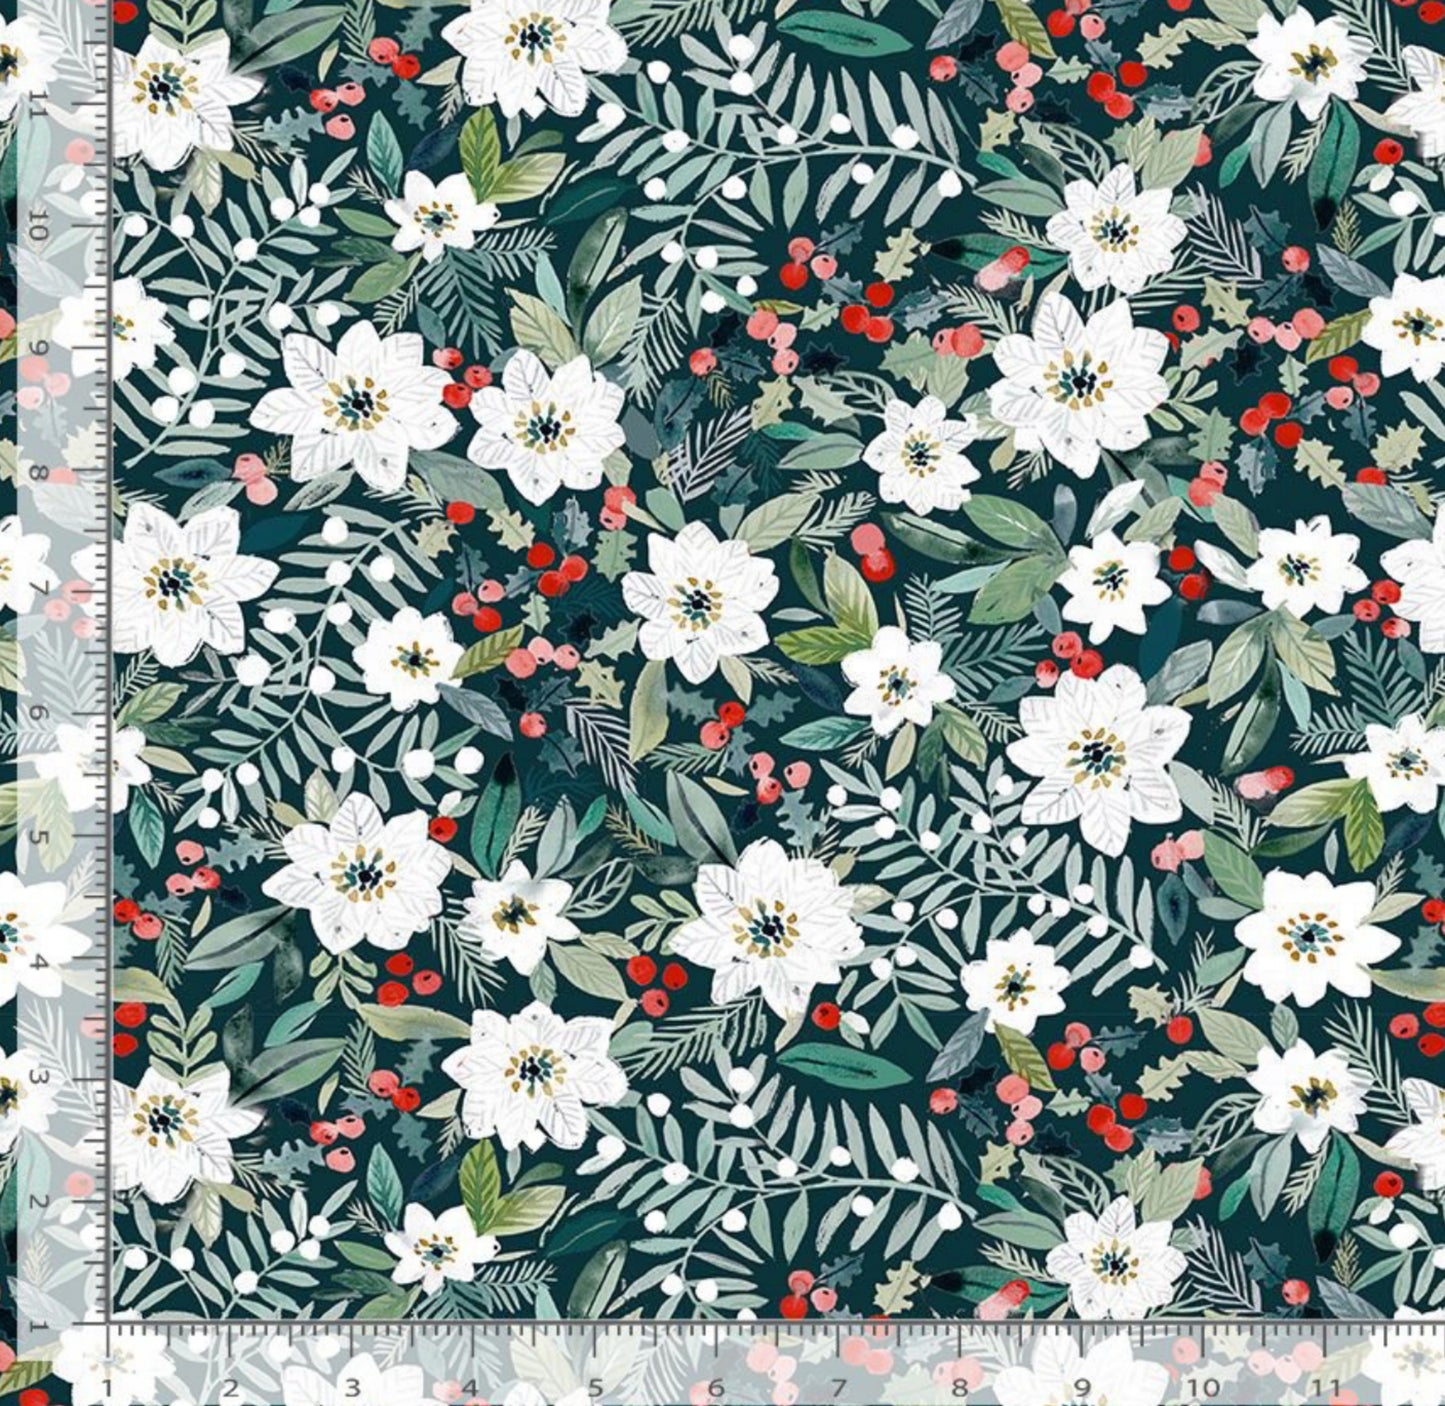 Holiday Poinsettias - Sweater Weather Collection - Clara Jean for Dear Stella Fabrics